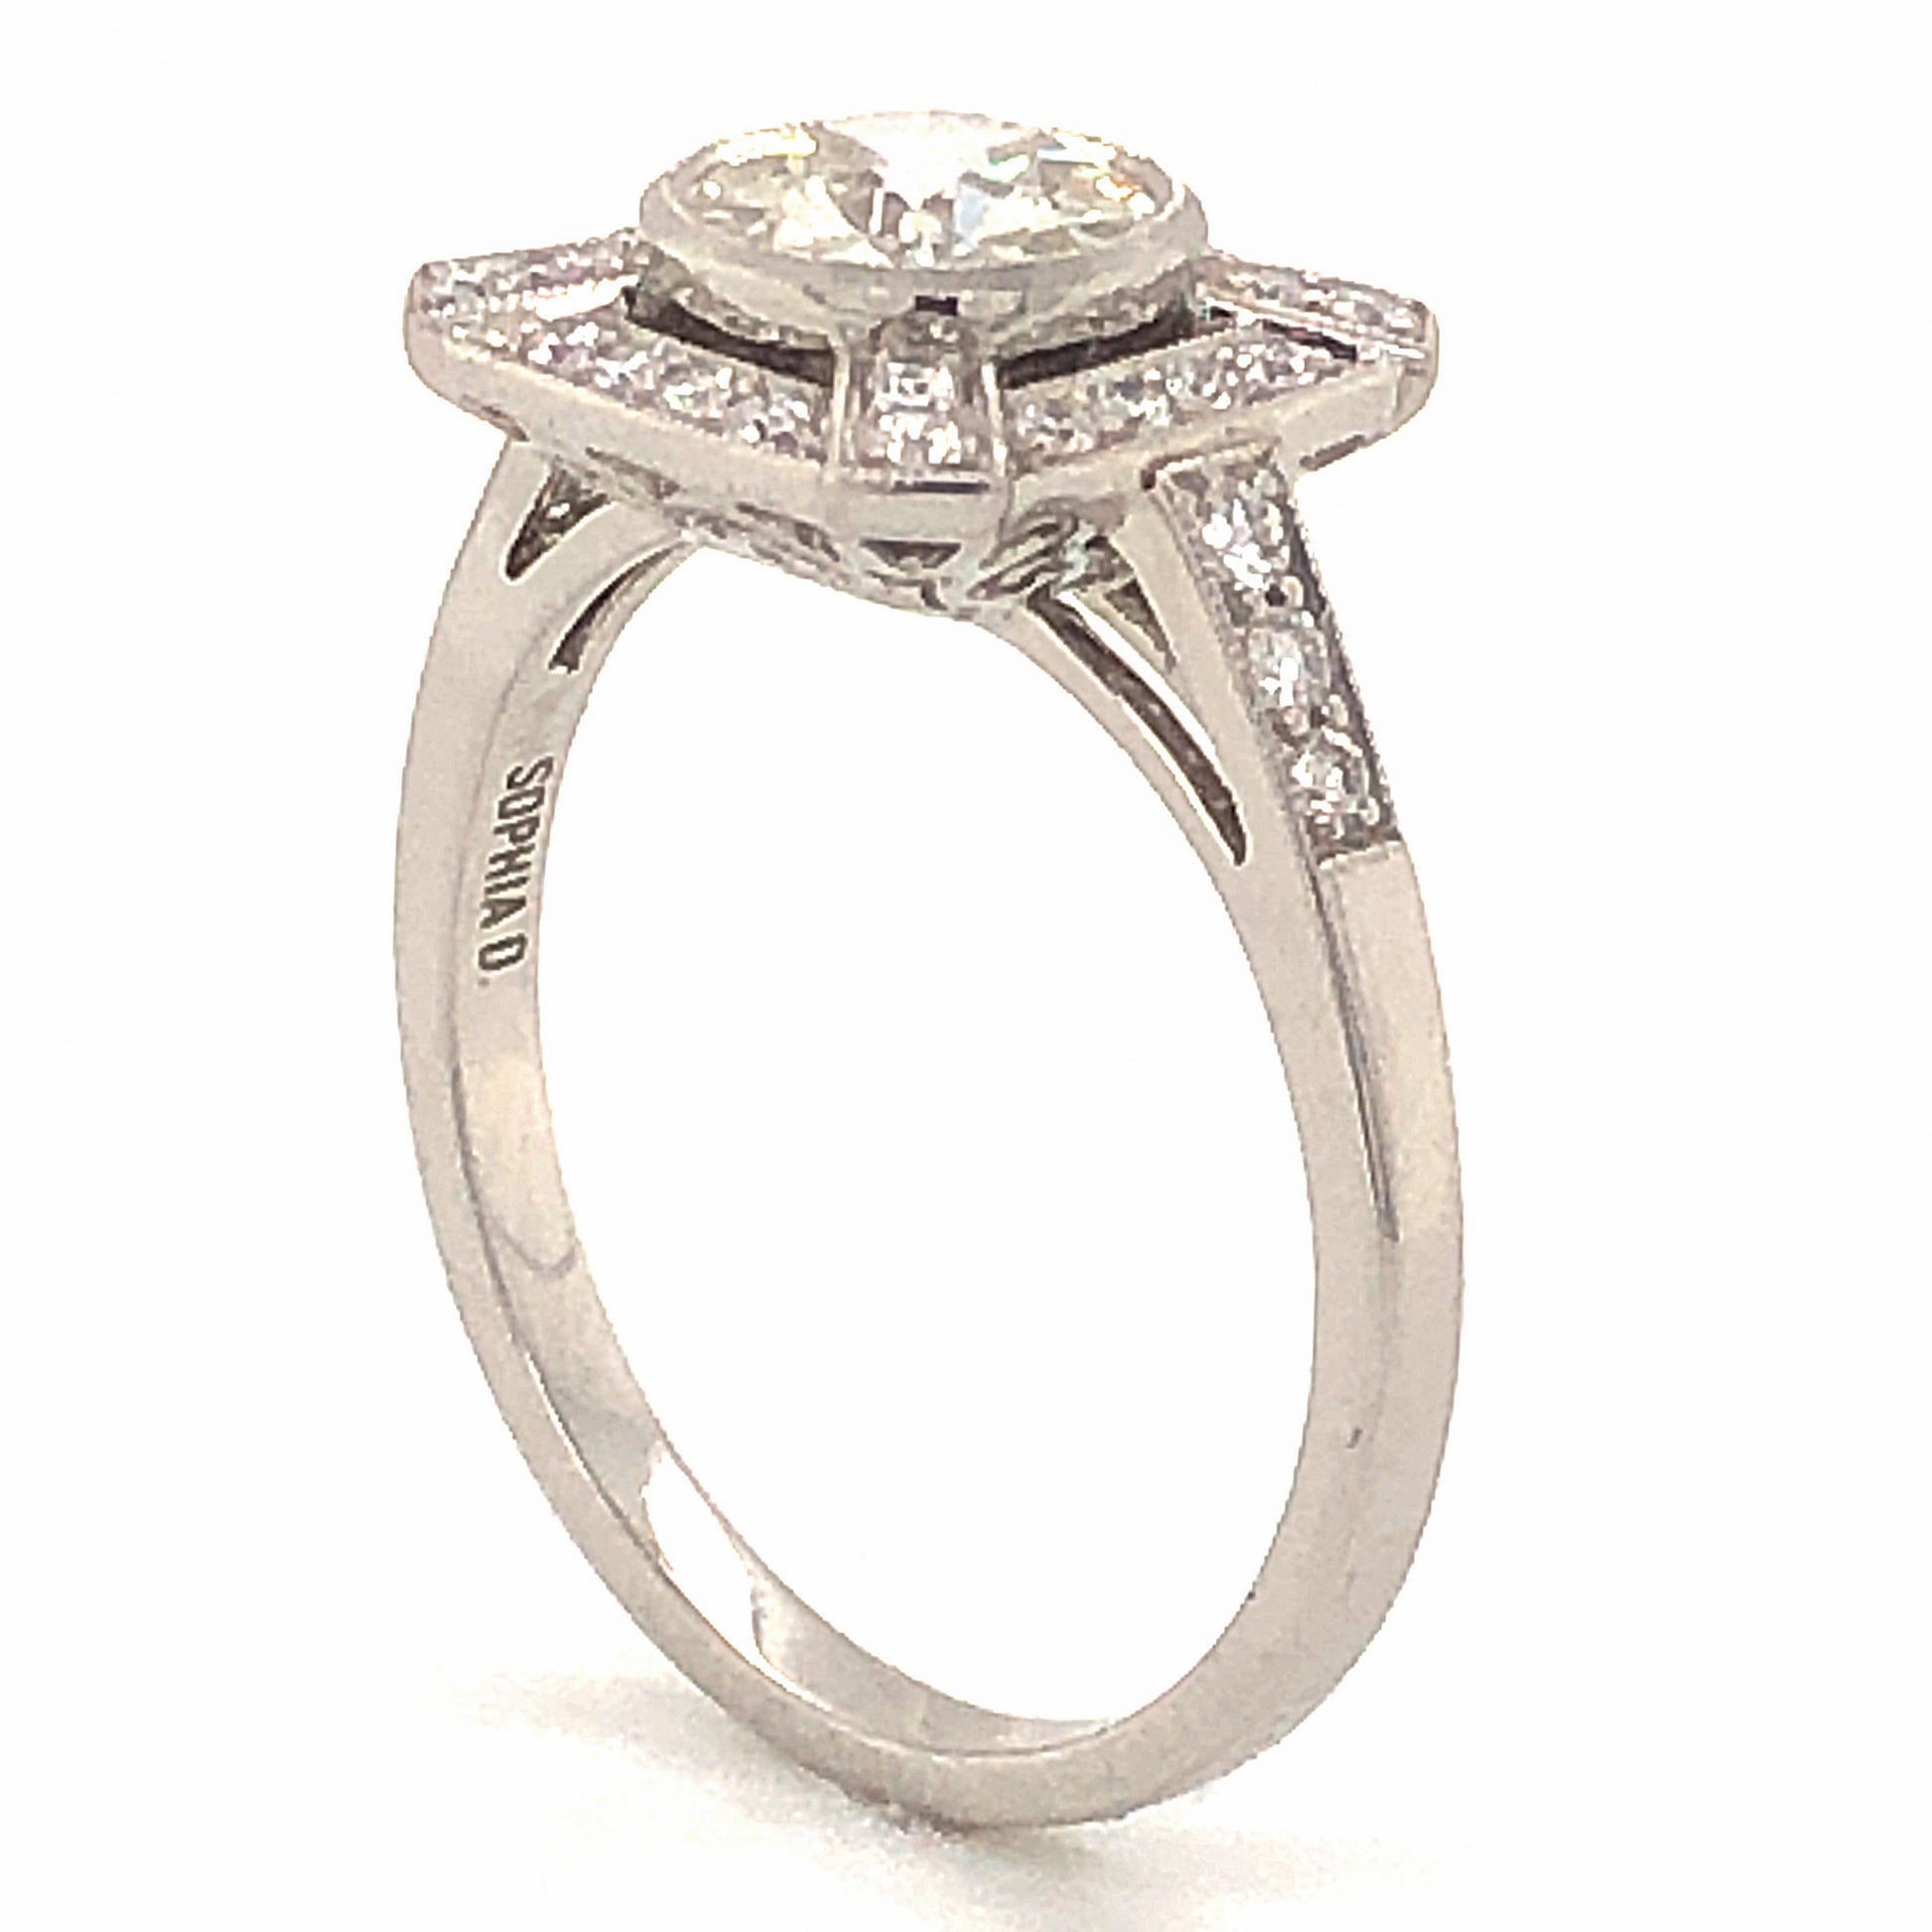 .81 Old European Cut Diamond Engagement Ring in PlatinumComposition: Platinum Ring Size: 6.5 Total Diamond Weight: 1.27ct Total Gram Weight: 5.46 g Inscription: pt950
      